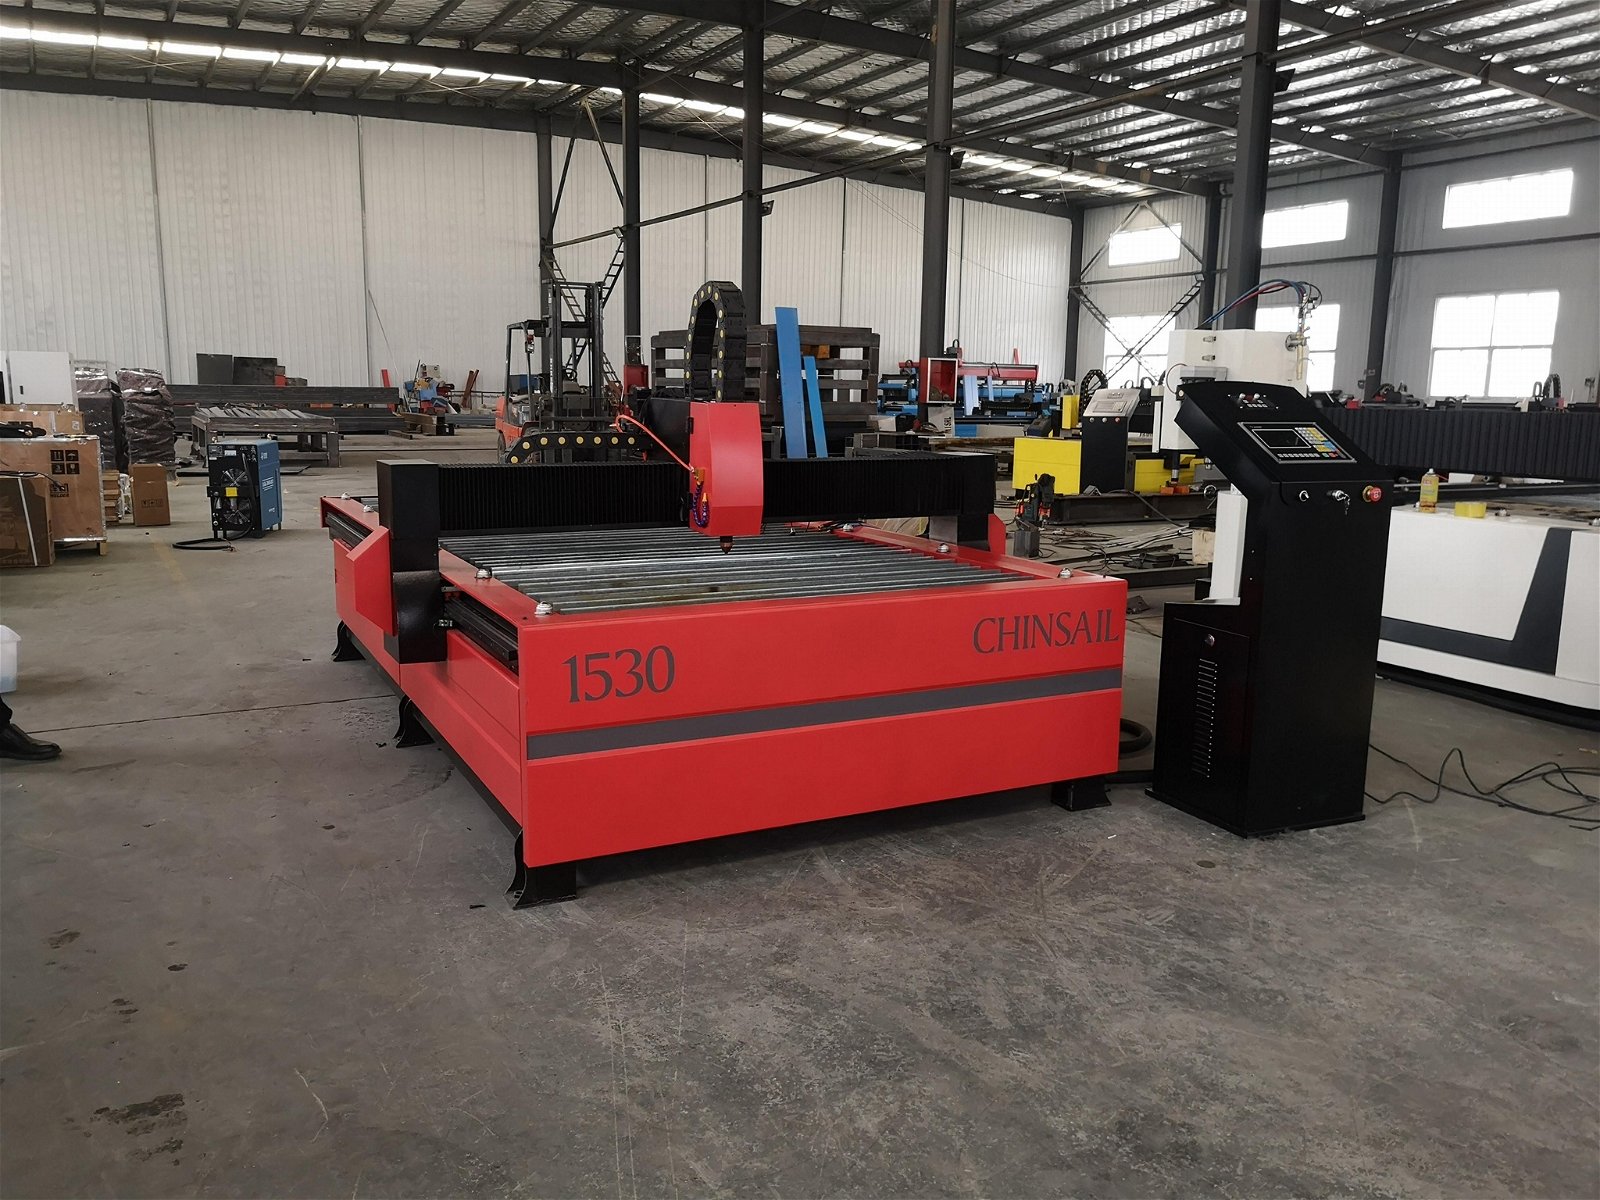 Plasma cutting machines for iron/steel plate cutting with good price